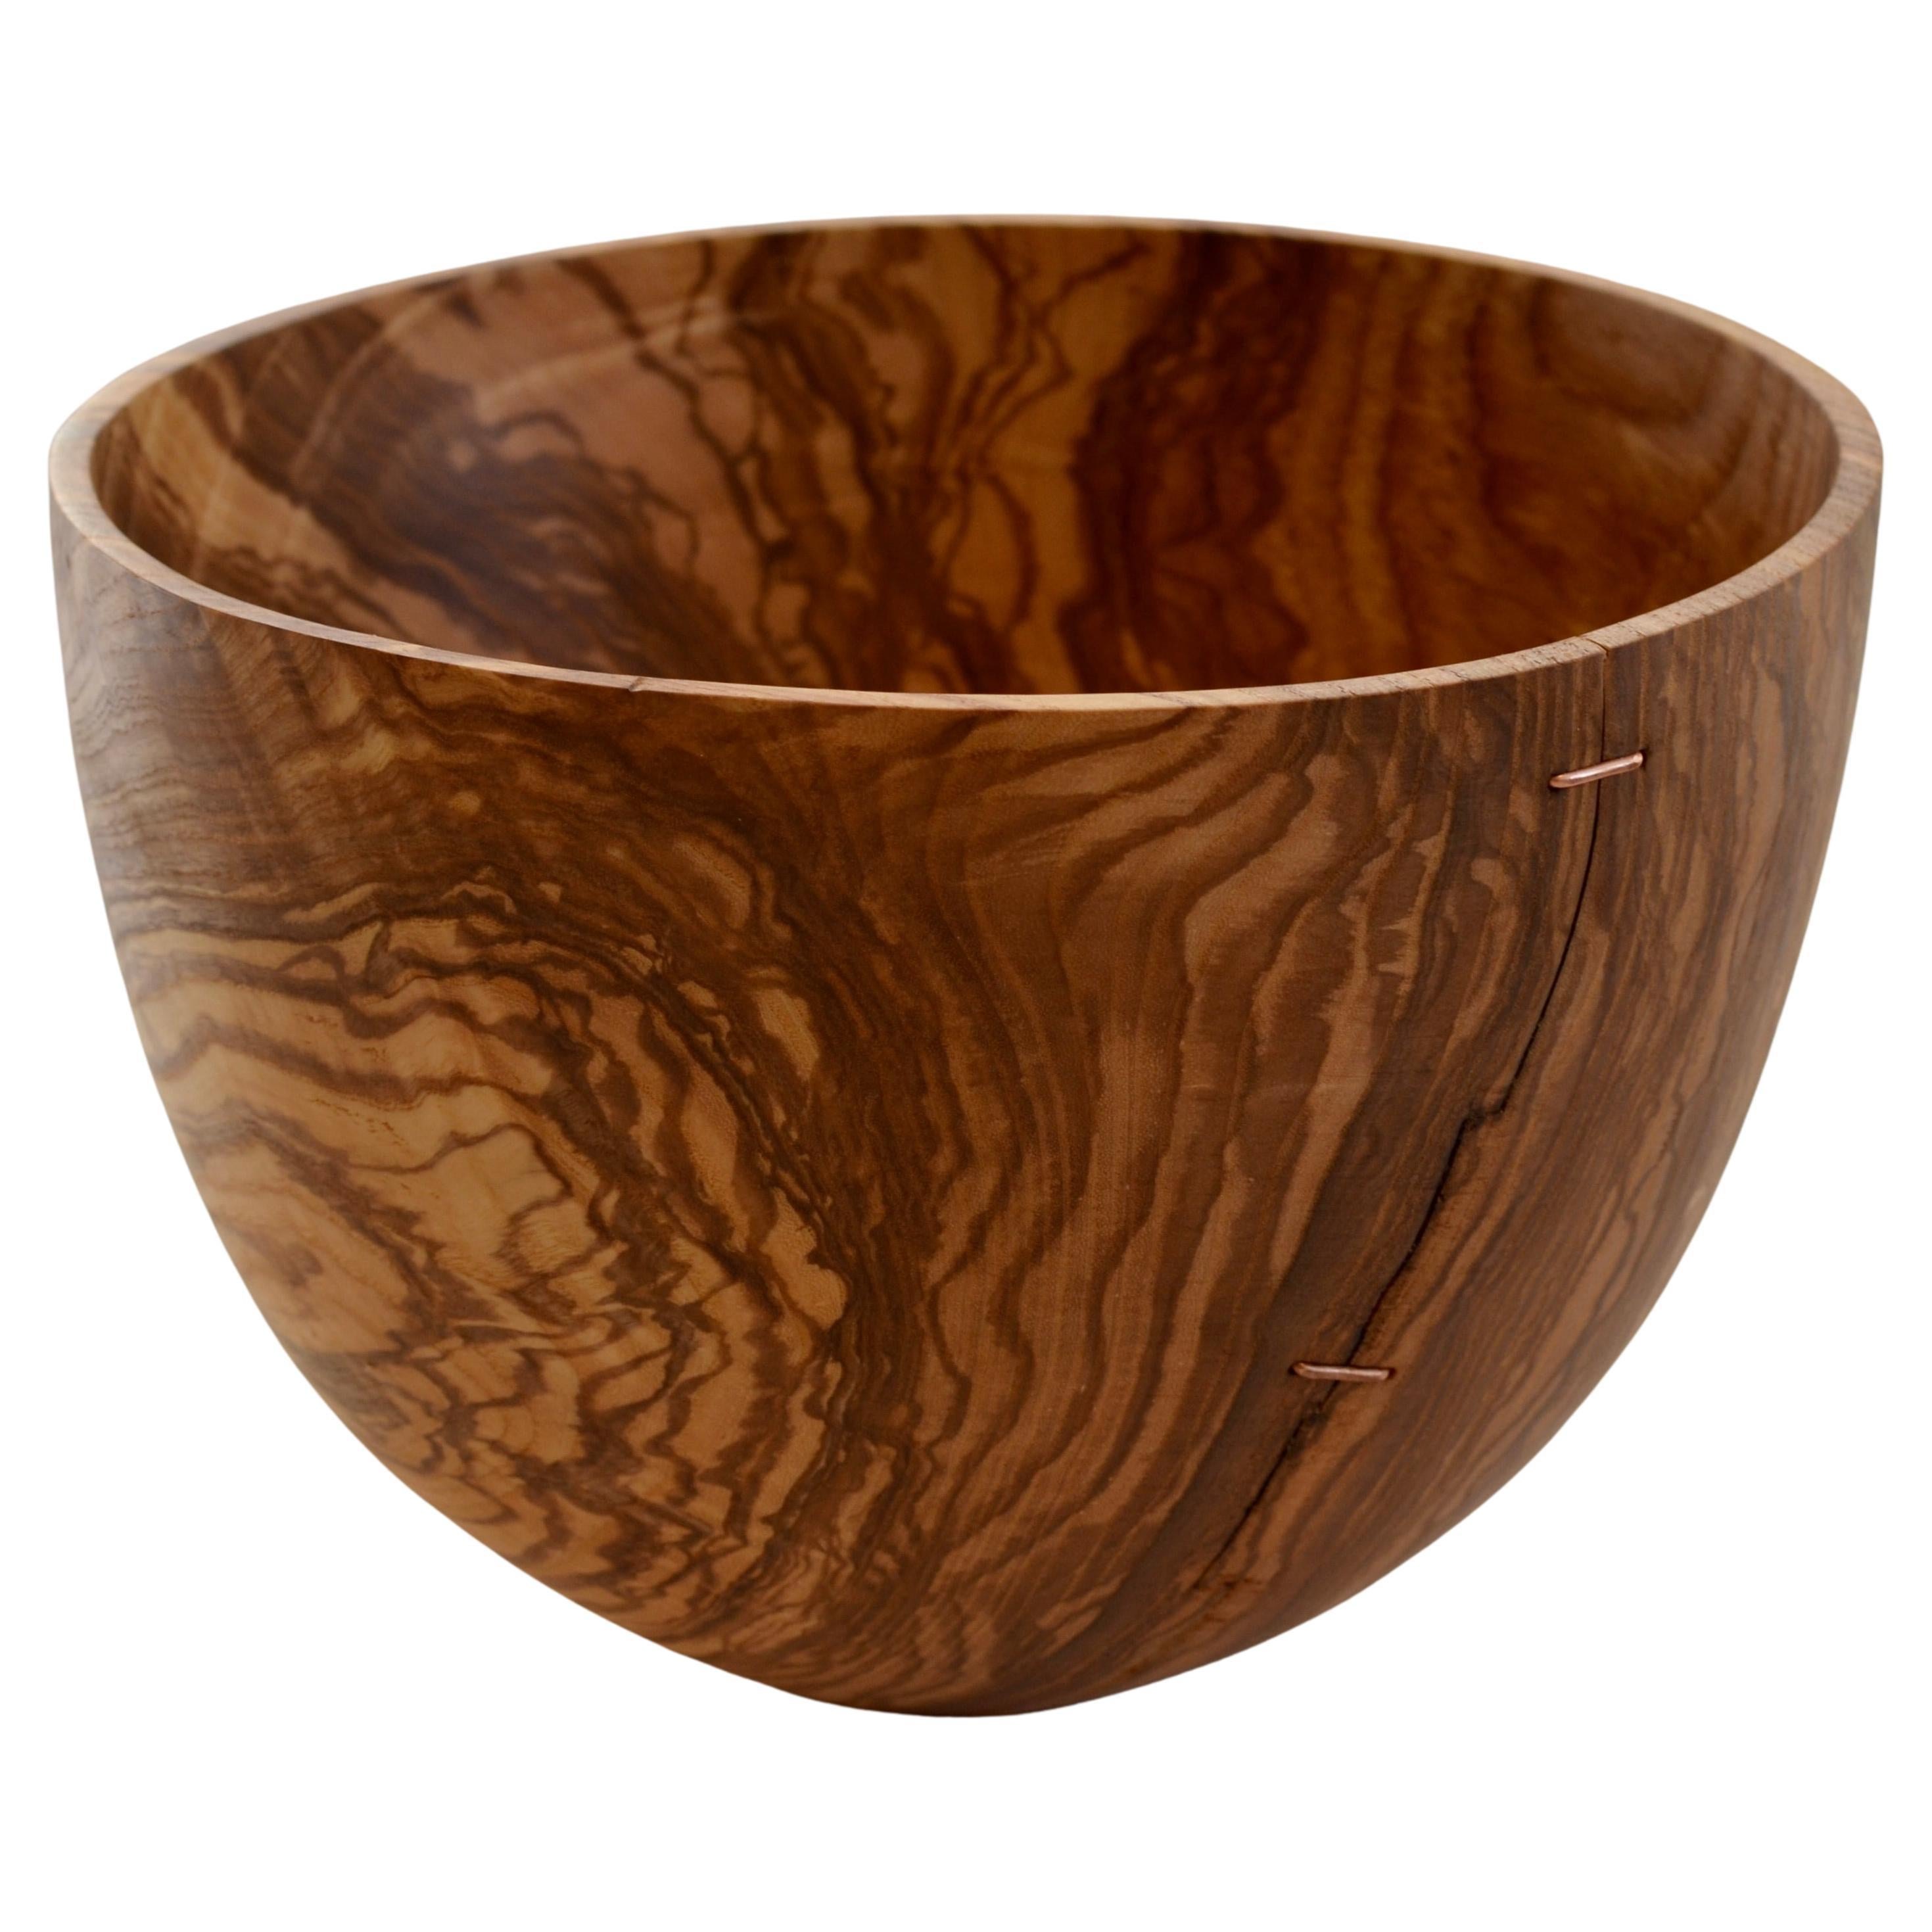 Hand-Carved Natural Ash Wood Bowl with Staple Details For Sale